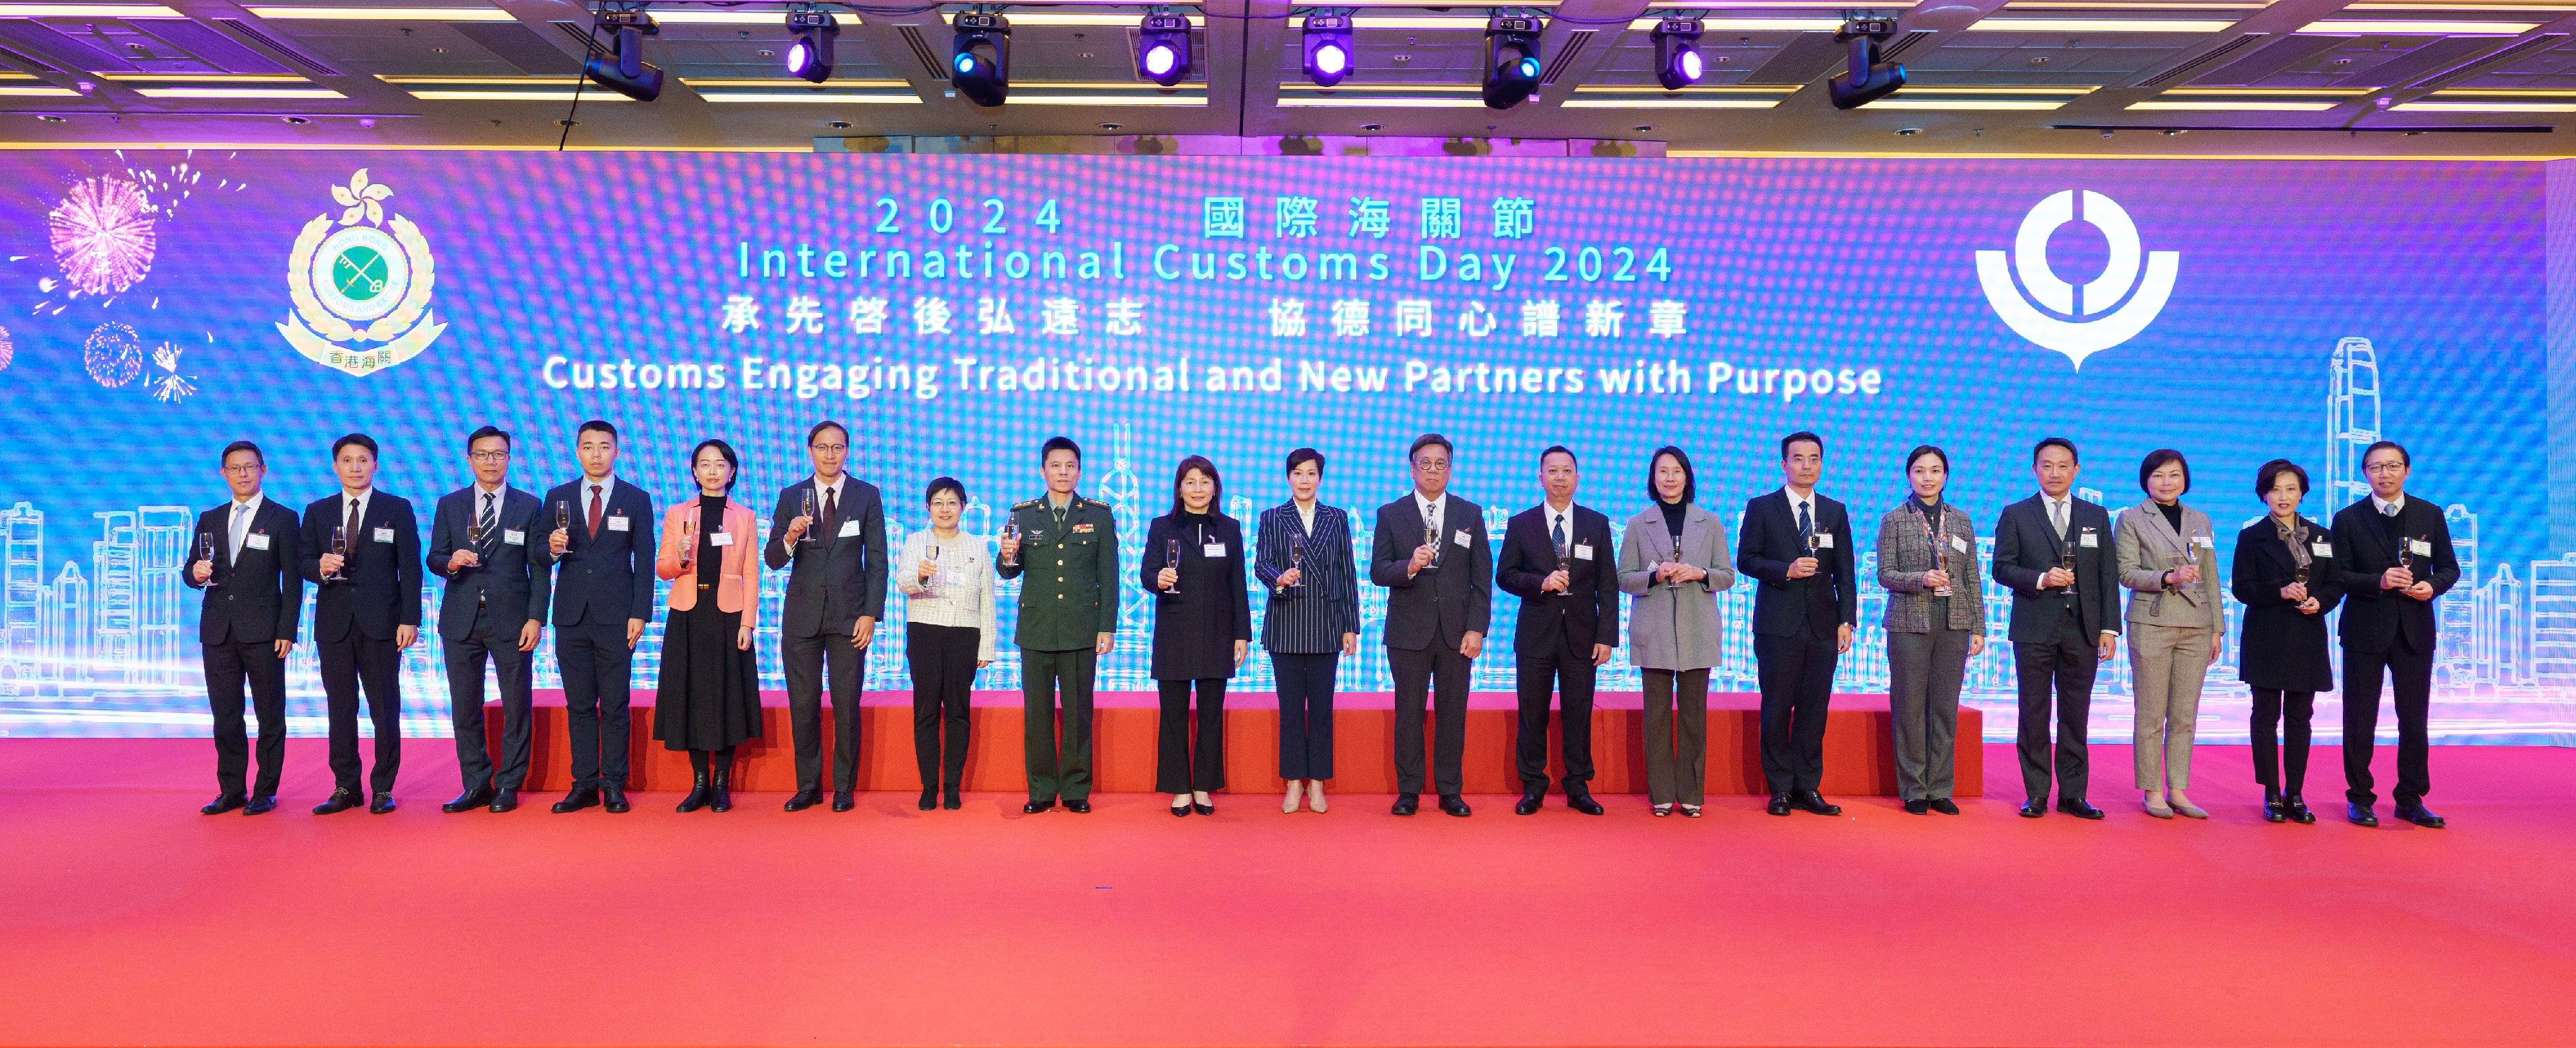 The Director of Public Prosecutions, Ms Maggie Yang (ninth left), and the Commissioner of Customs and Excise, Ms Louise Ho (centre), proposed a toast at a reception in celebration of International Customs Day 2024 today (January 25). Joining them are the Secretary for Commerce and Economic Development, Mr Algernon Yau (ninth right); the Chinese People's Liberation Army Hong Kong Garrison, Senior Colonel Qi Xiaochun (eighth left); the Director-General of Macao Customs Service, Mr Vong Man-chong (eighth right); the Acting Head of the Commercial Office of the Economic Affairs Department of the LOCPG in the HKSAR, Ms Chen Jiarong (seventh left); the Deputy Secretary for Financial Services and the Treasury, Ms Manda Chan (seventh right); the Commissioner for Narcotics of the Narcotics Division of the Security Bureau, Mr Kesson Lee (sixth left); the Director of the Liaison Office of the Office for Safeguarding National Security of the CPG in the HKSAR, Mr Zhang Jianfeng (sixth right); the Director-General of the Department of Treaty and Law of the Office of the Commissioner of the Ministry of Foreign Affairs of the People's Republic of China in the HKSAR, Ms Zhou Qian (fifth left); the Deputy Director of Executive Office of the Guangdong Sub-Administration of the General Administration of Customs of the People's Republic of China, Ms Wu Siliu (fifth right); the Analyst at Level 3 of the Police Liaison Department of the Liaison Office of the CPG in the HKSAR, Mr Qiu Guobin (fourth left); and the directorates of Hong Kong Customs.